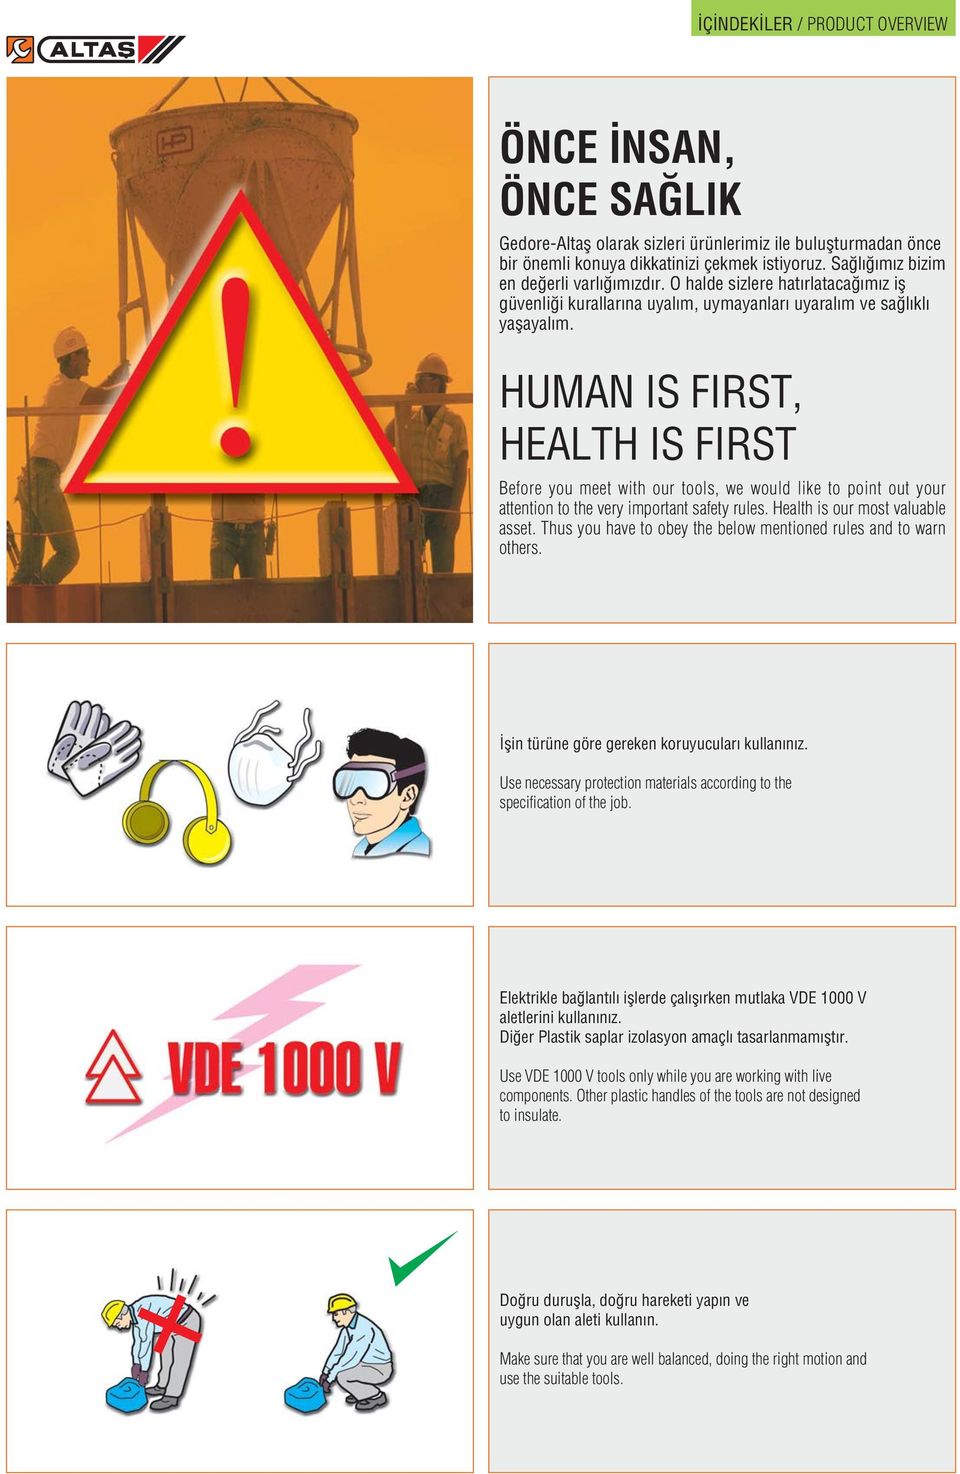 HUMAN IS FIRST, HEALTH IS FIRST Before you meet with our tools, we would like to point out your attention to the very important safety rules. Health is our most valuable asset.